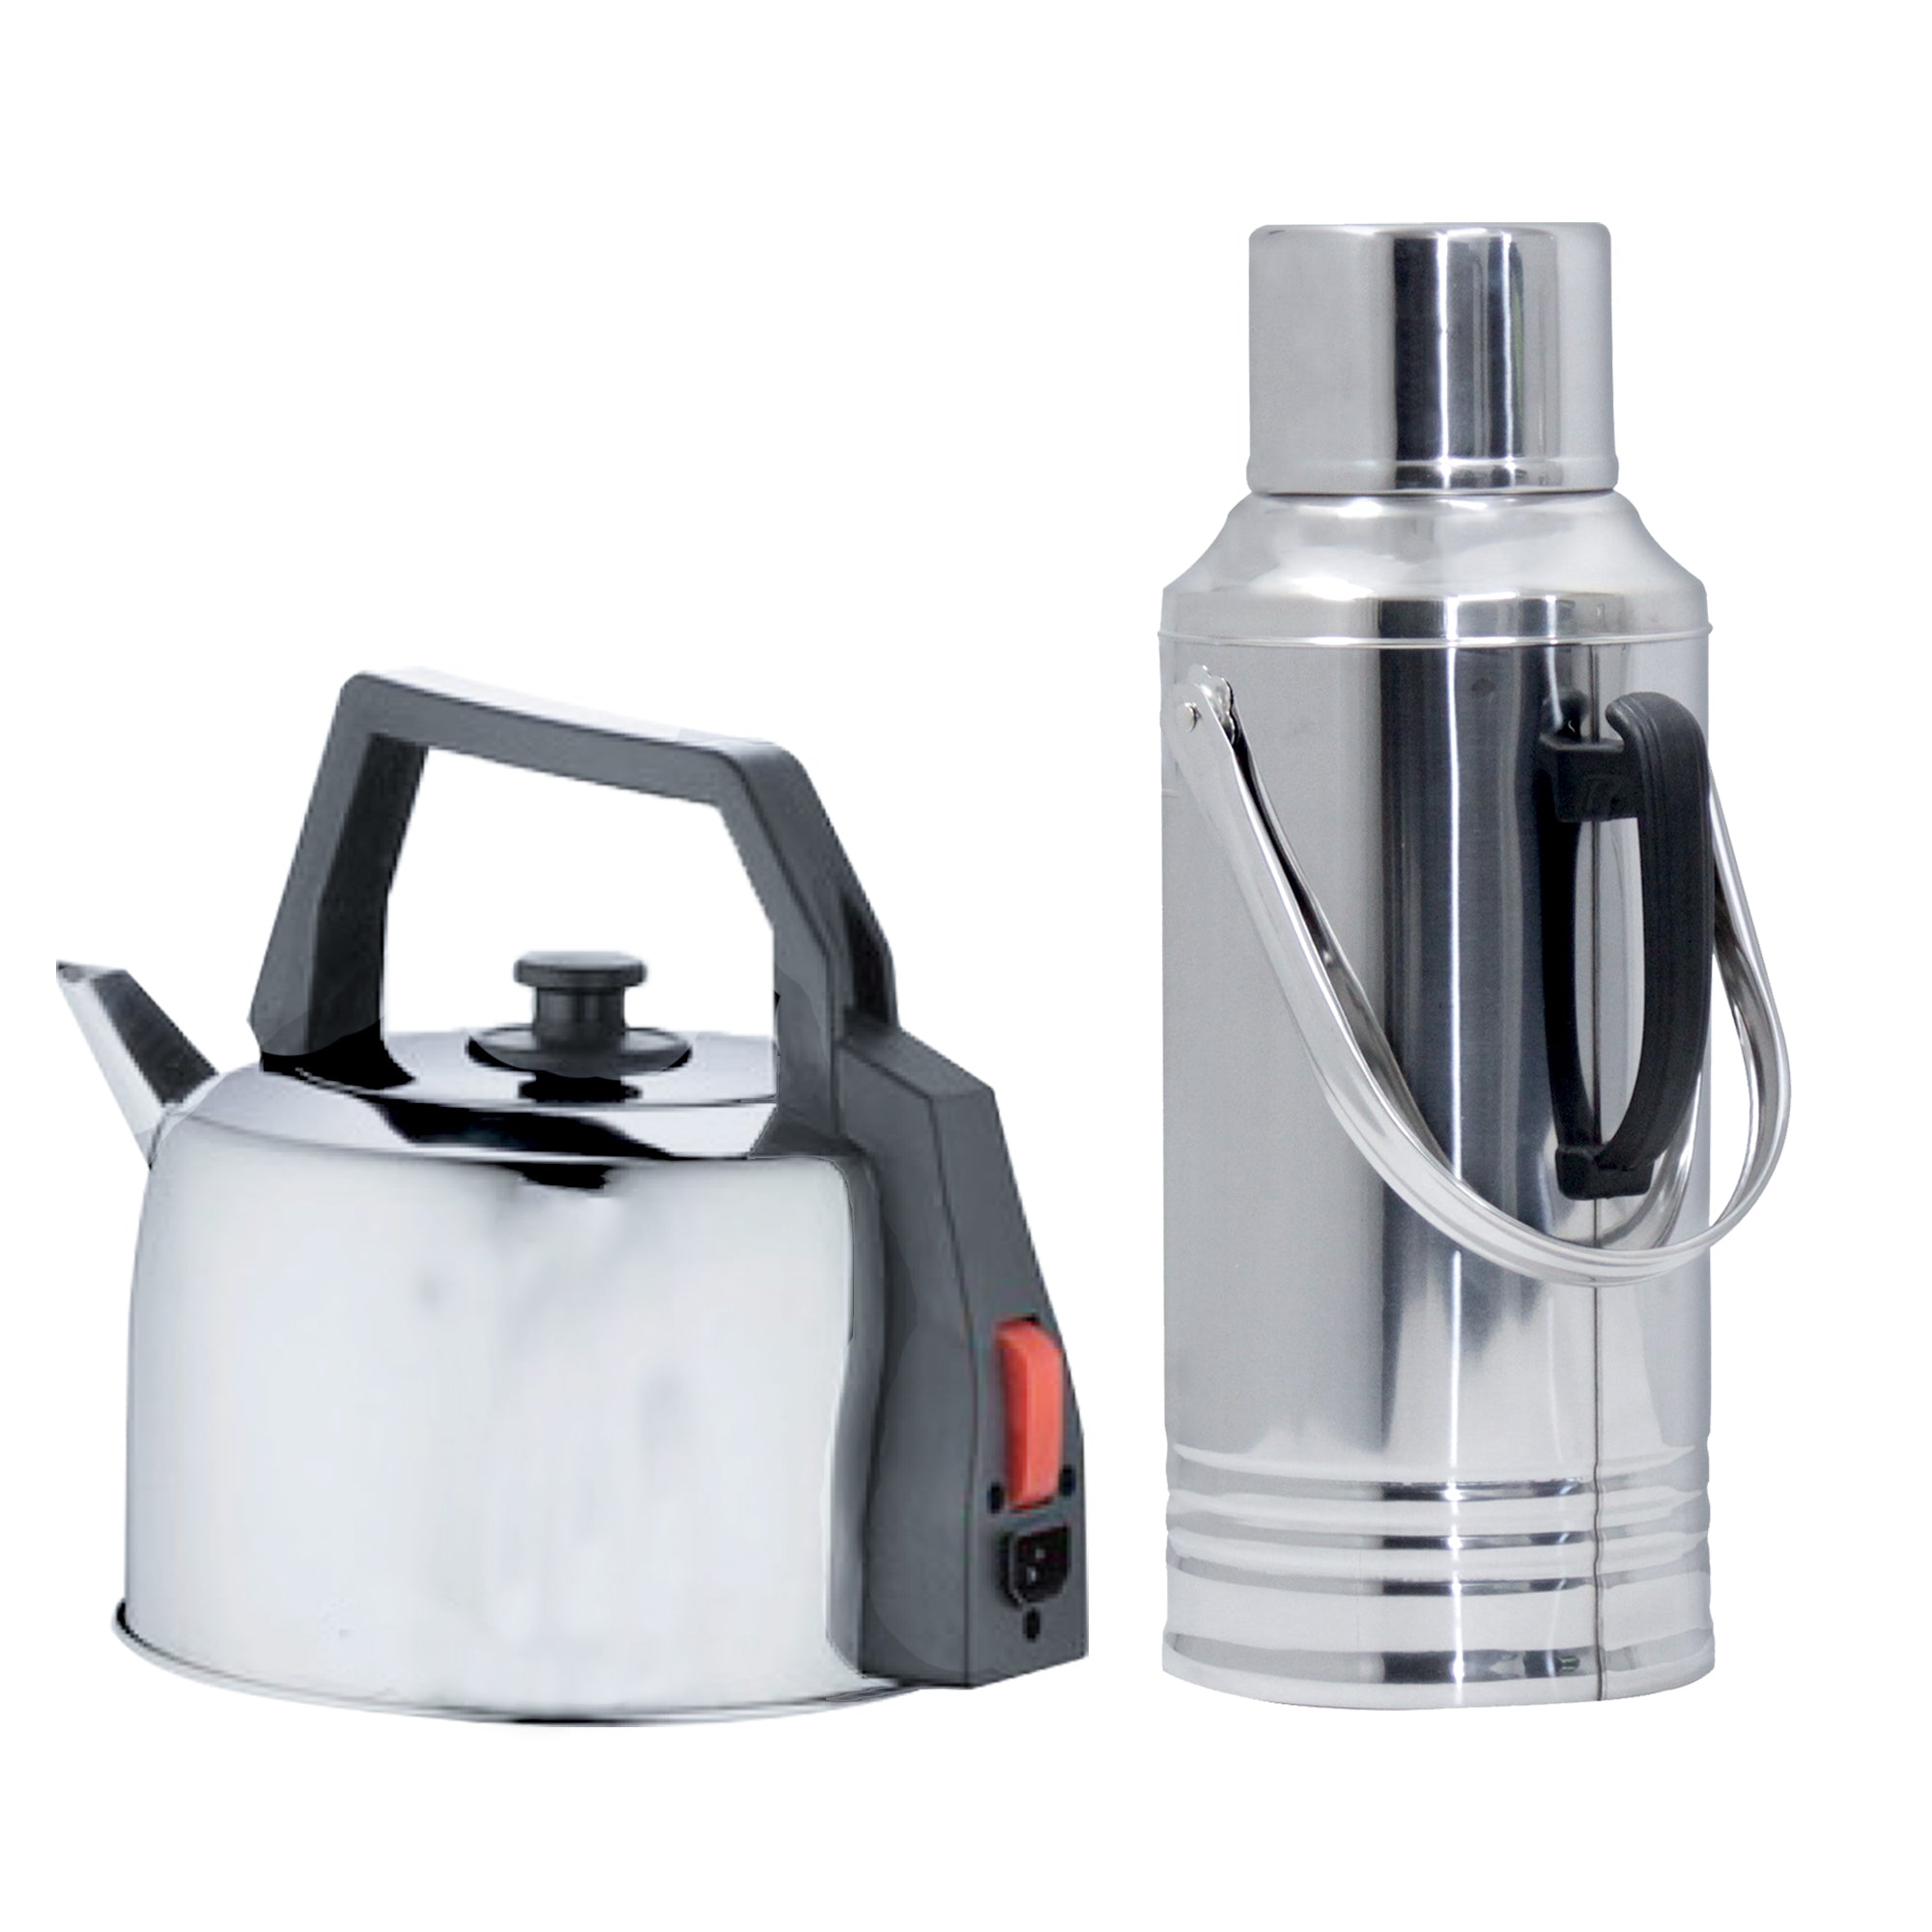 3.2L Steel Glass-Inner Vacuum Insulated Flask and 4.1 Litre Electric Kettle